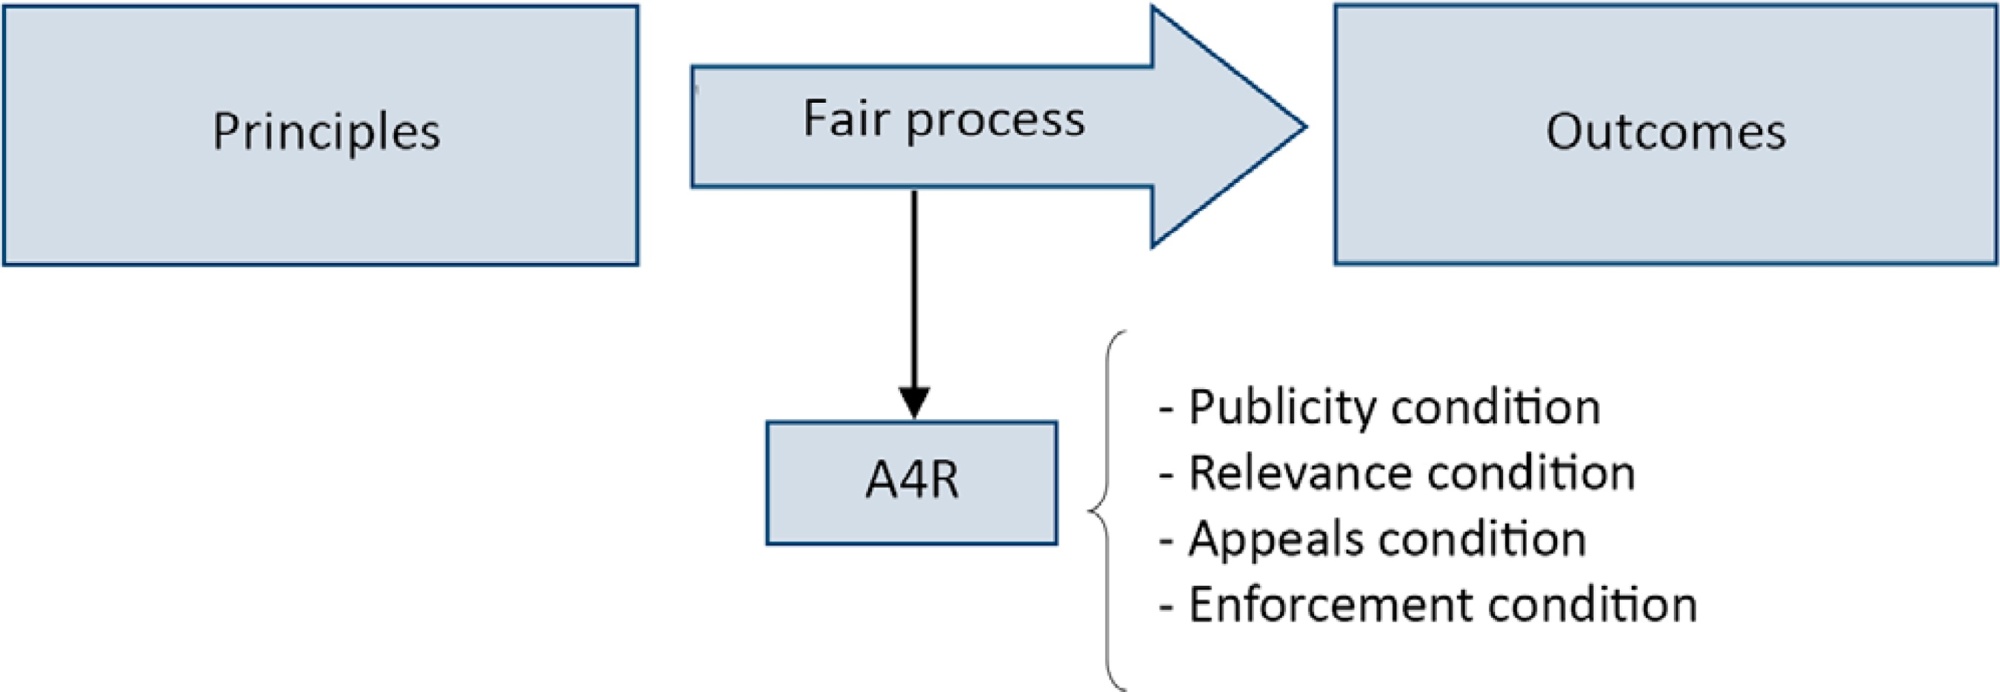 Accountability for reasonableness and criteria for admission, triage and discharge in intensive care units: an analysis of current ethical recommendations